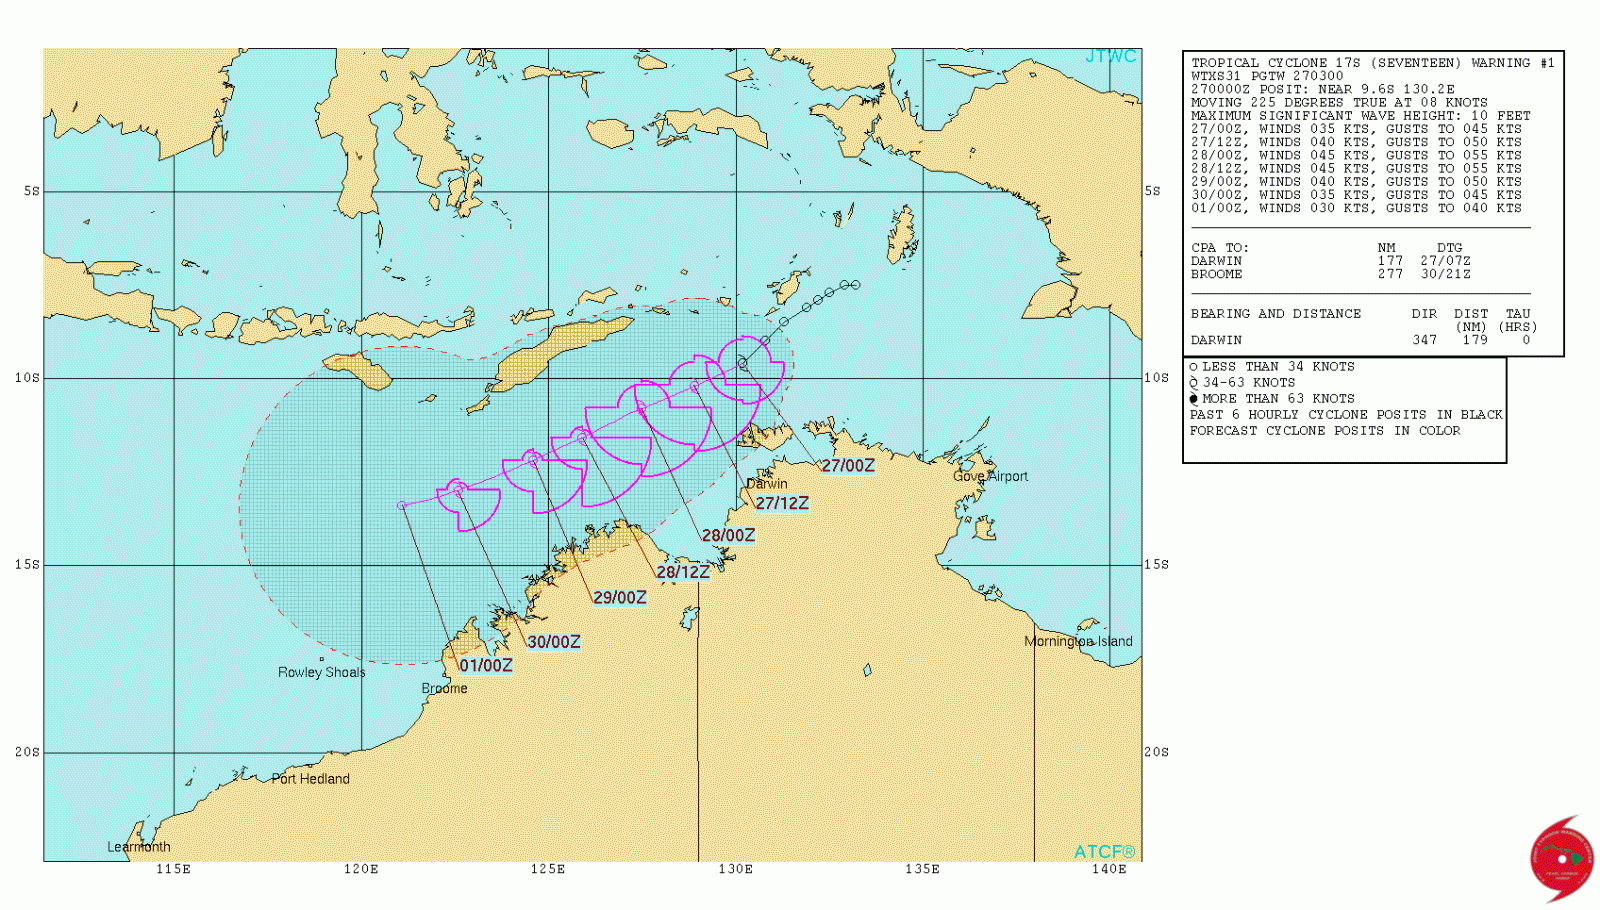 Tropical Cyclone Frances forecast track by JTWC at 03:00 UTC on April 27, 2017